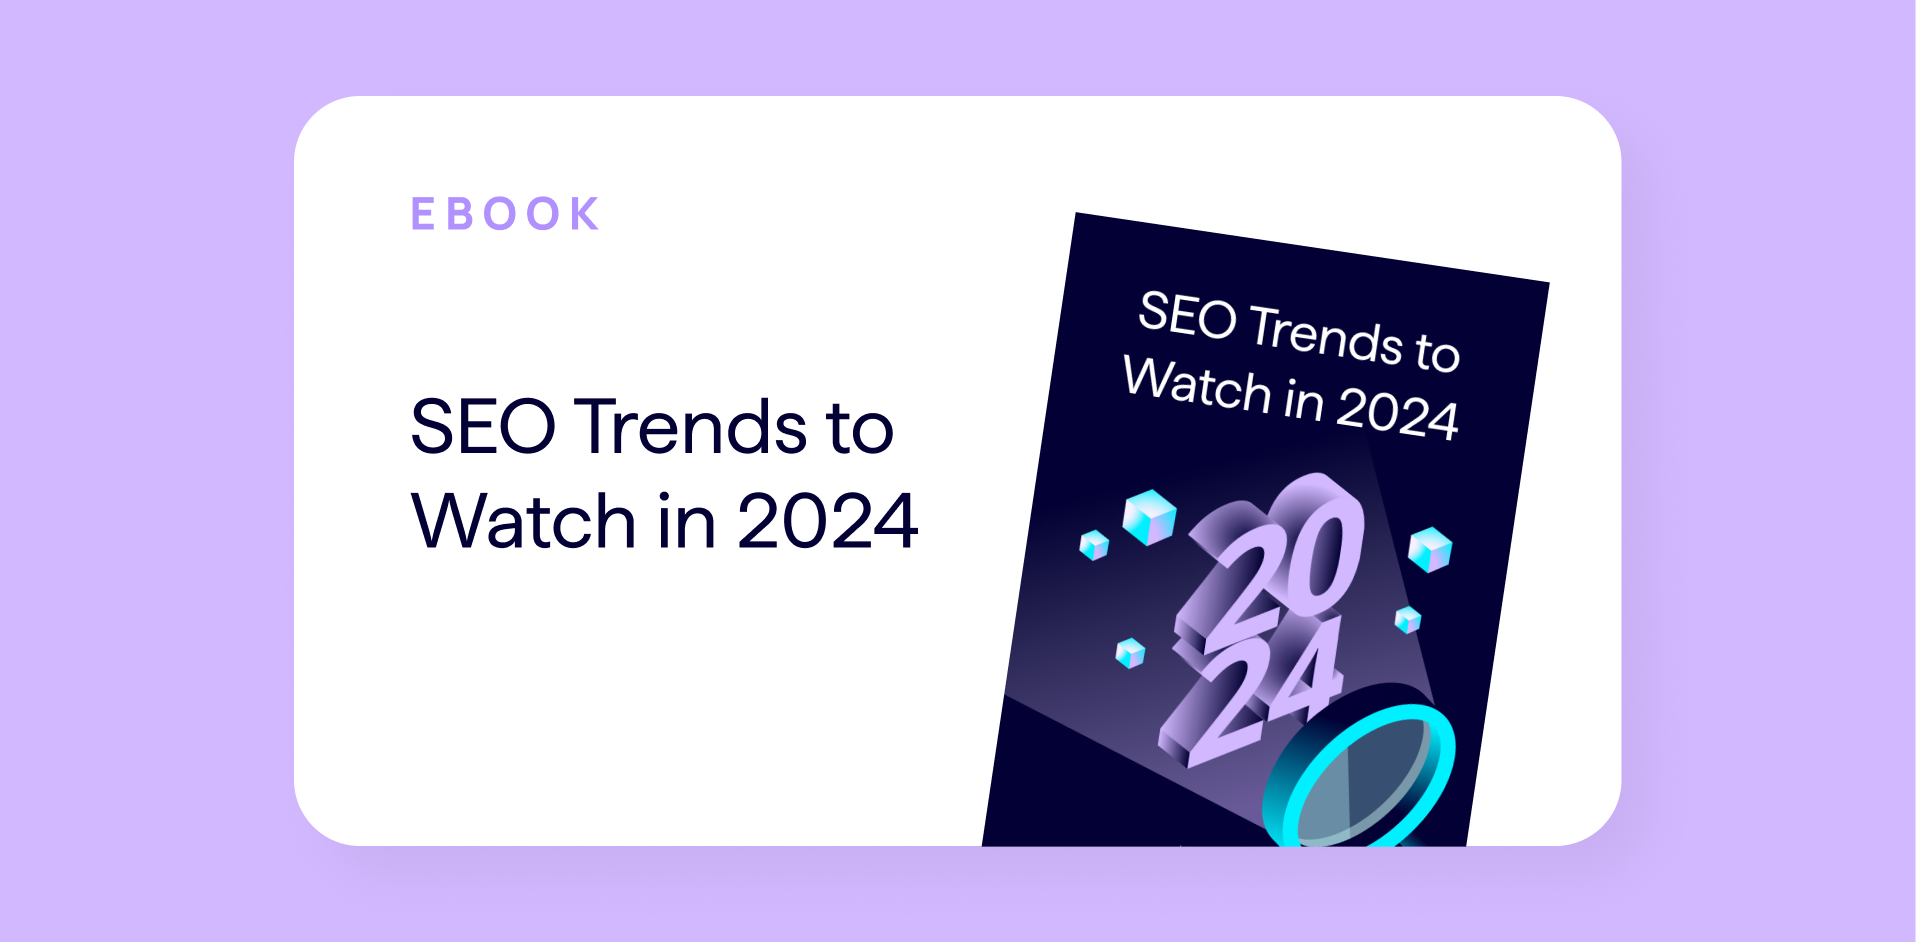 SEO Trends to Watch in 2024 - eBook cover image